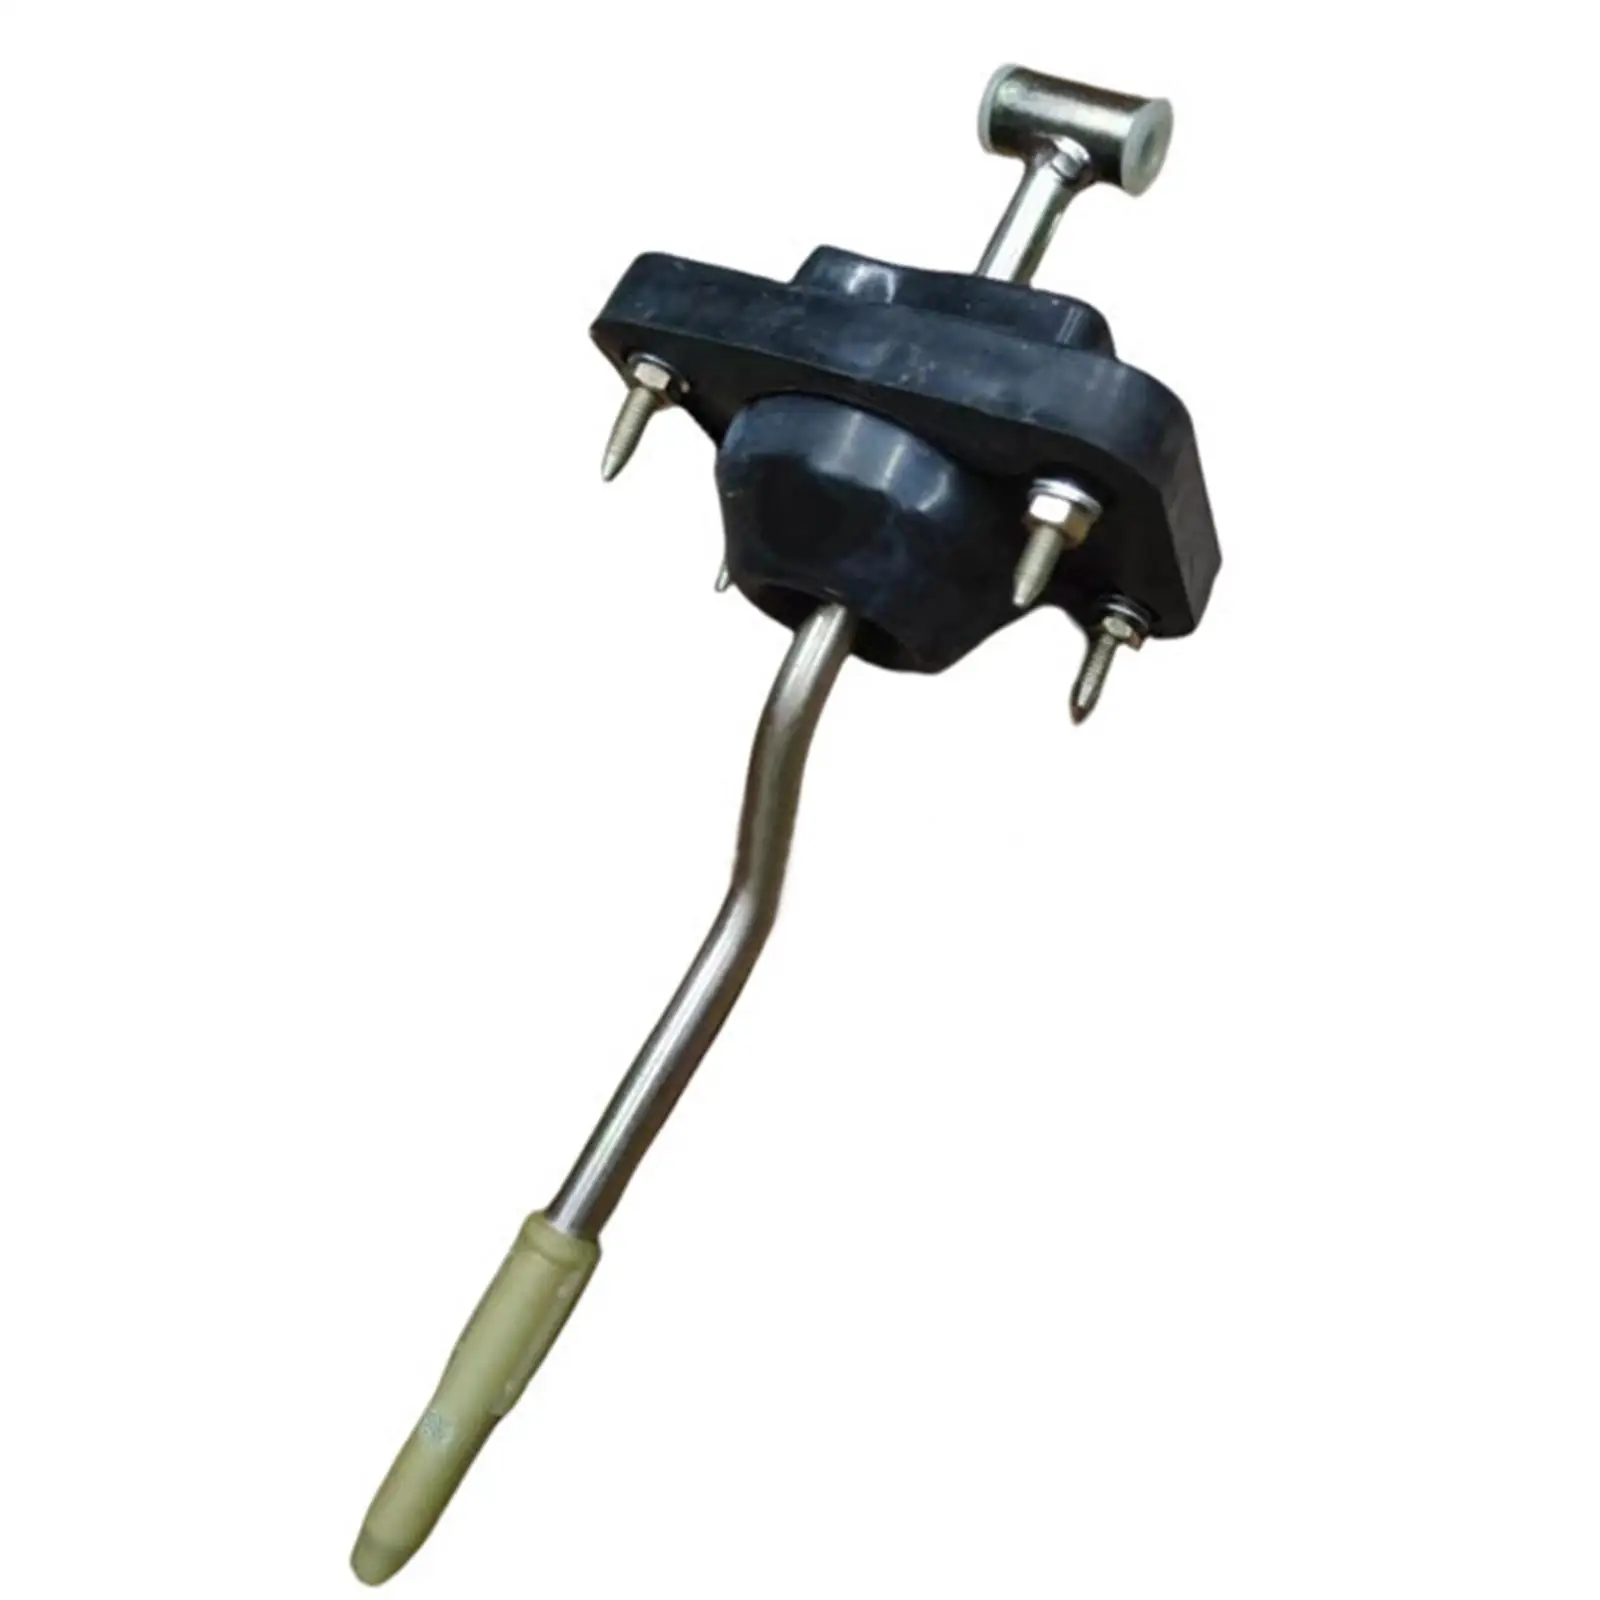 Gear Shift Lever Assembly Auto Accessories Replaces 2400H3 for Peugeot 206 207 Stable Performance Easy Installation